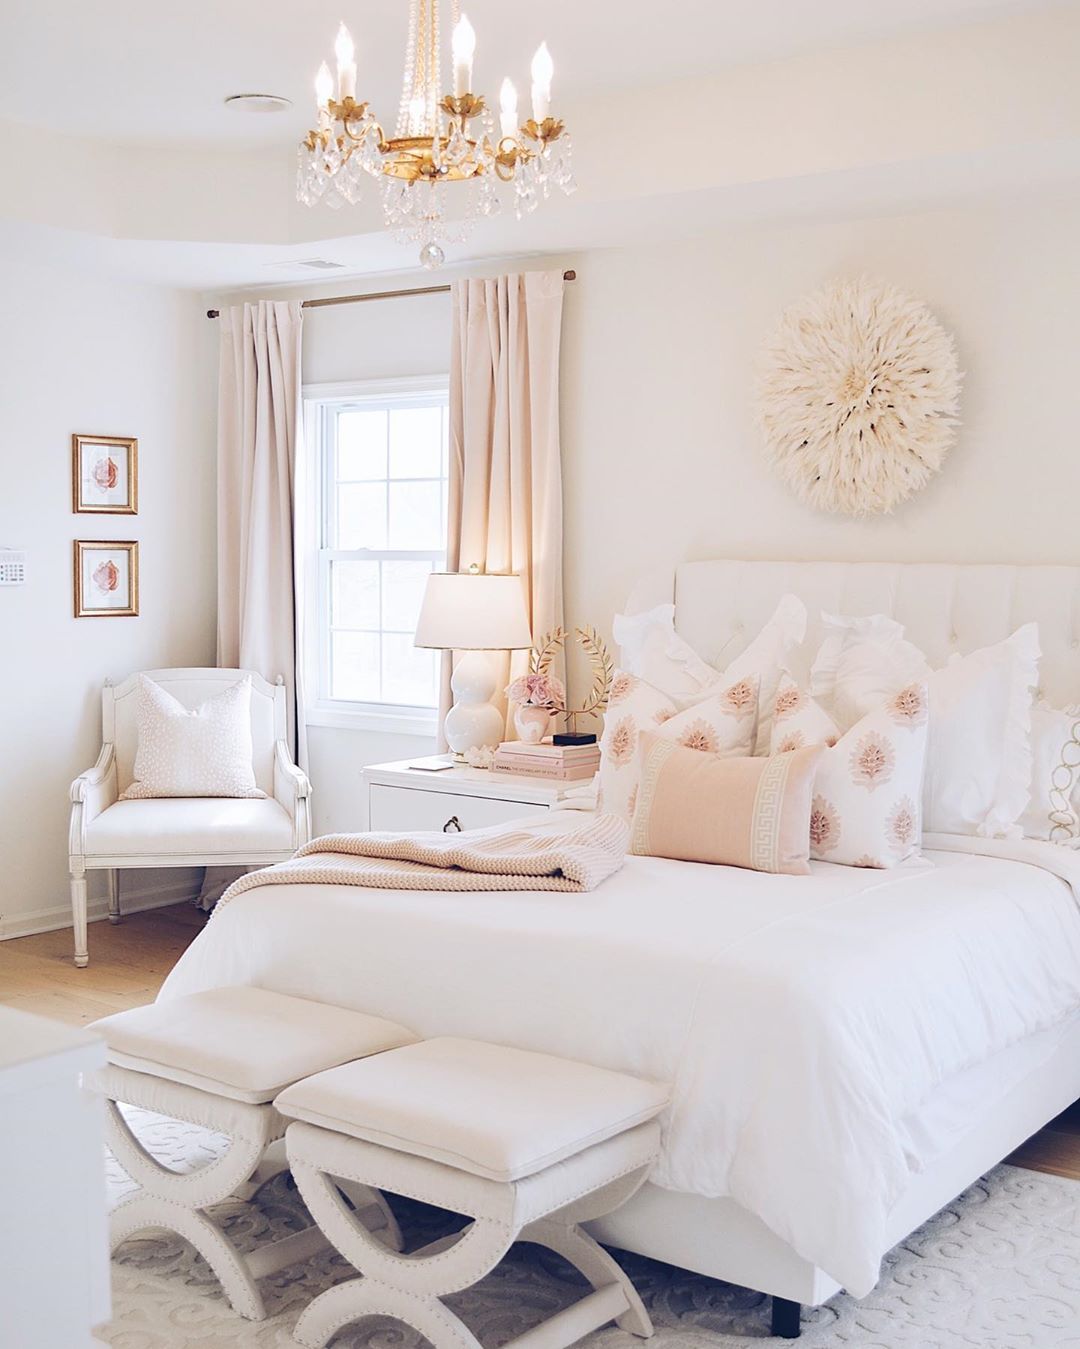 Glam Bedroom with Pale Pink decor accents and twin stools at food of bed via @the.pink.dream